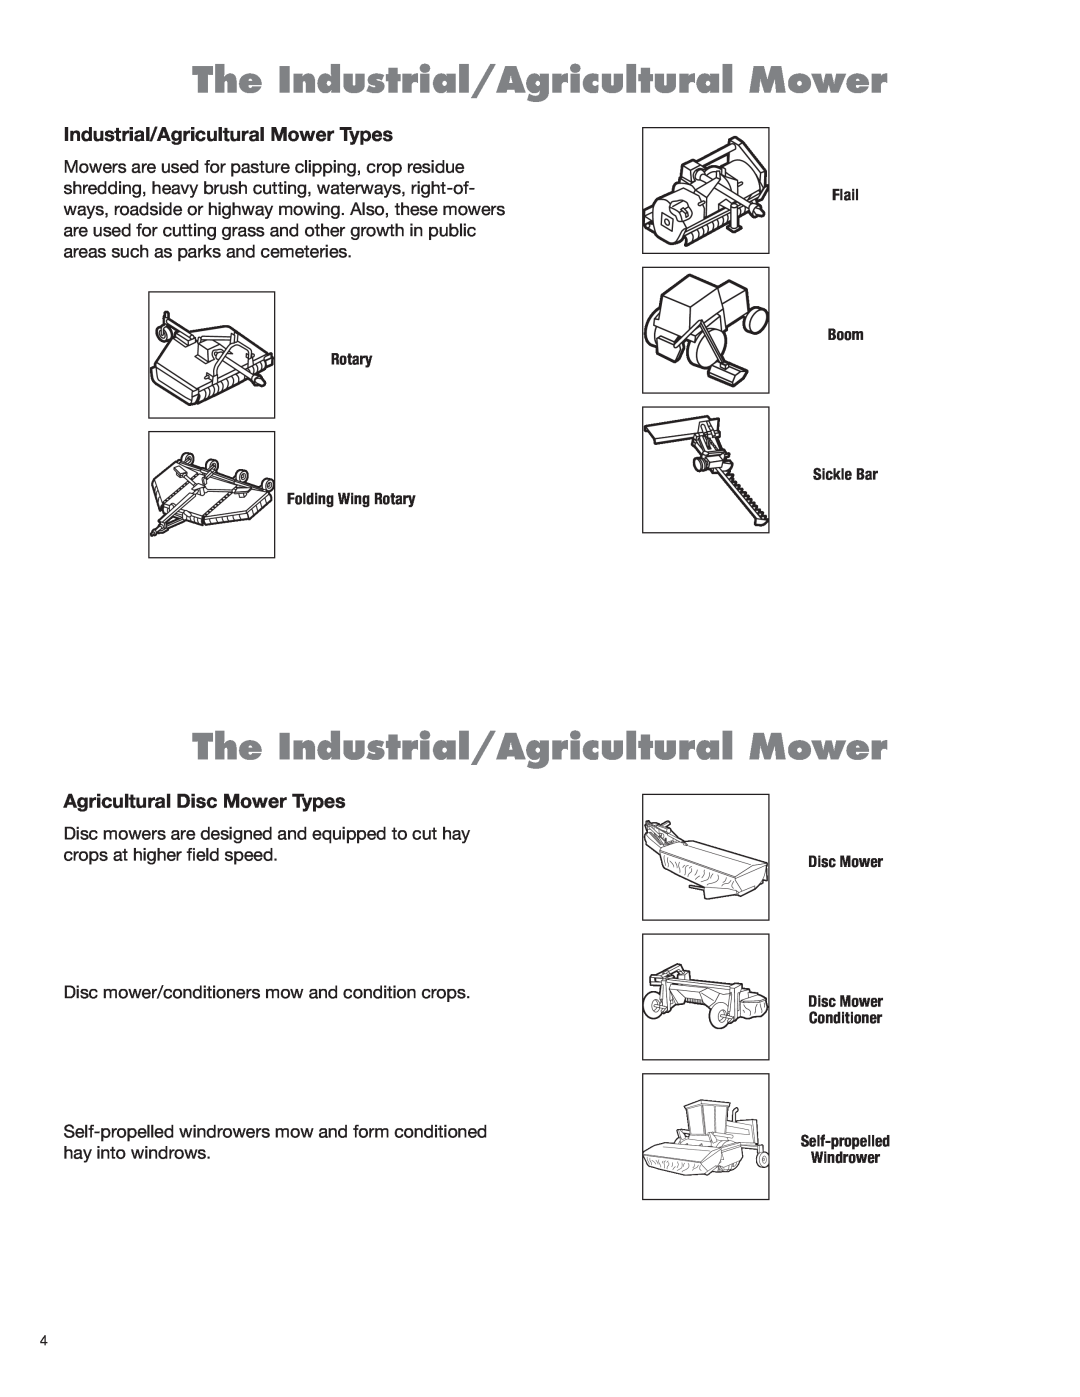 Servis-Rhino 2160 The Industrial/Agricultural Mower, Industrial/Agricultural Mower Types, Agricultural Disc Mower Types 